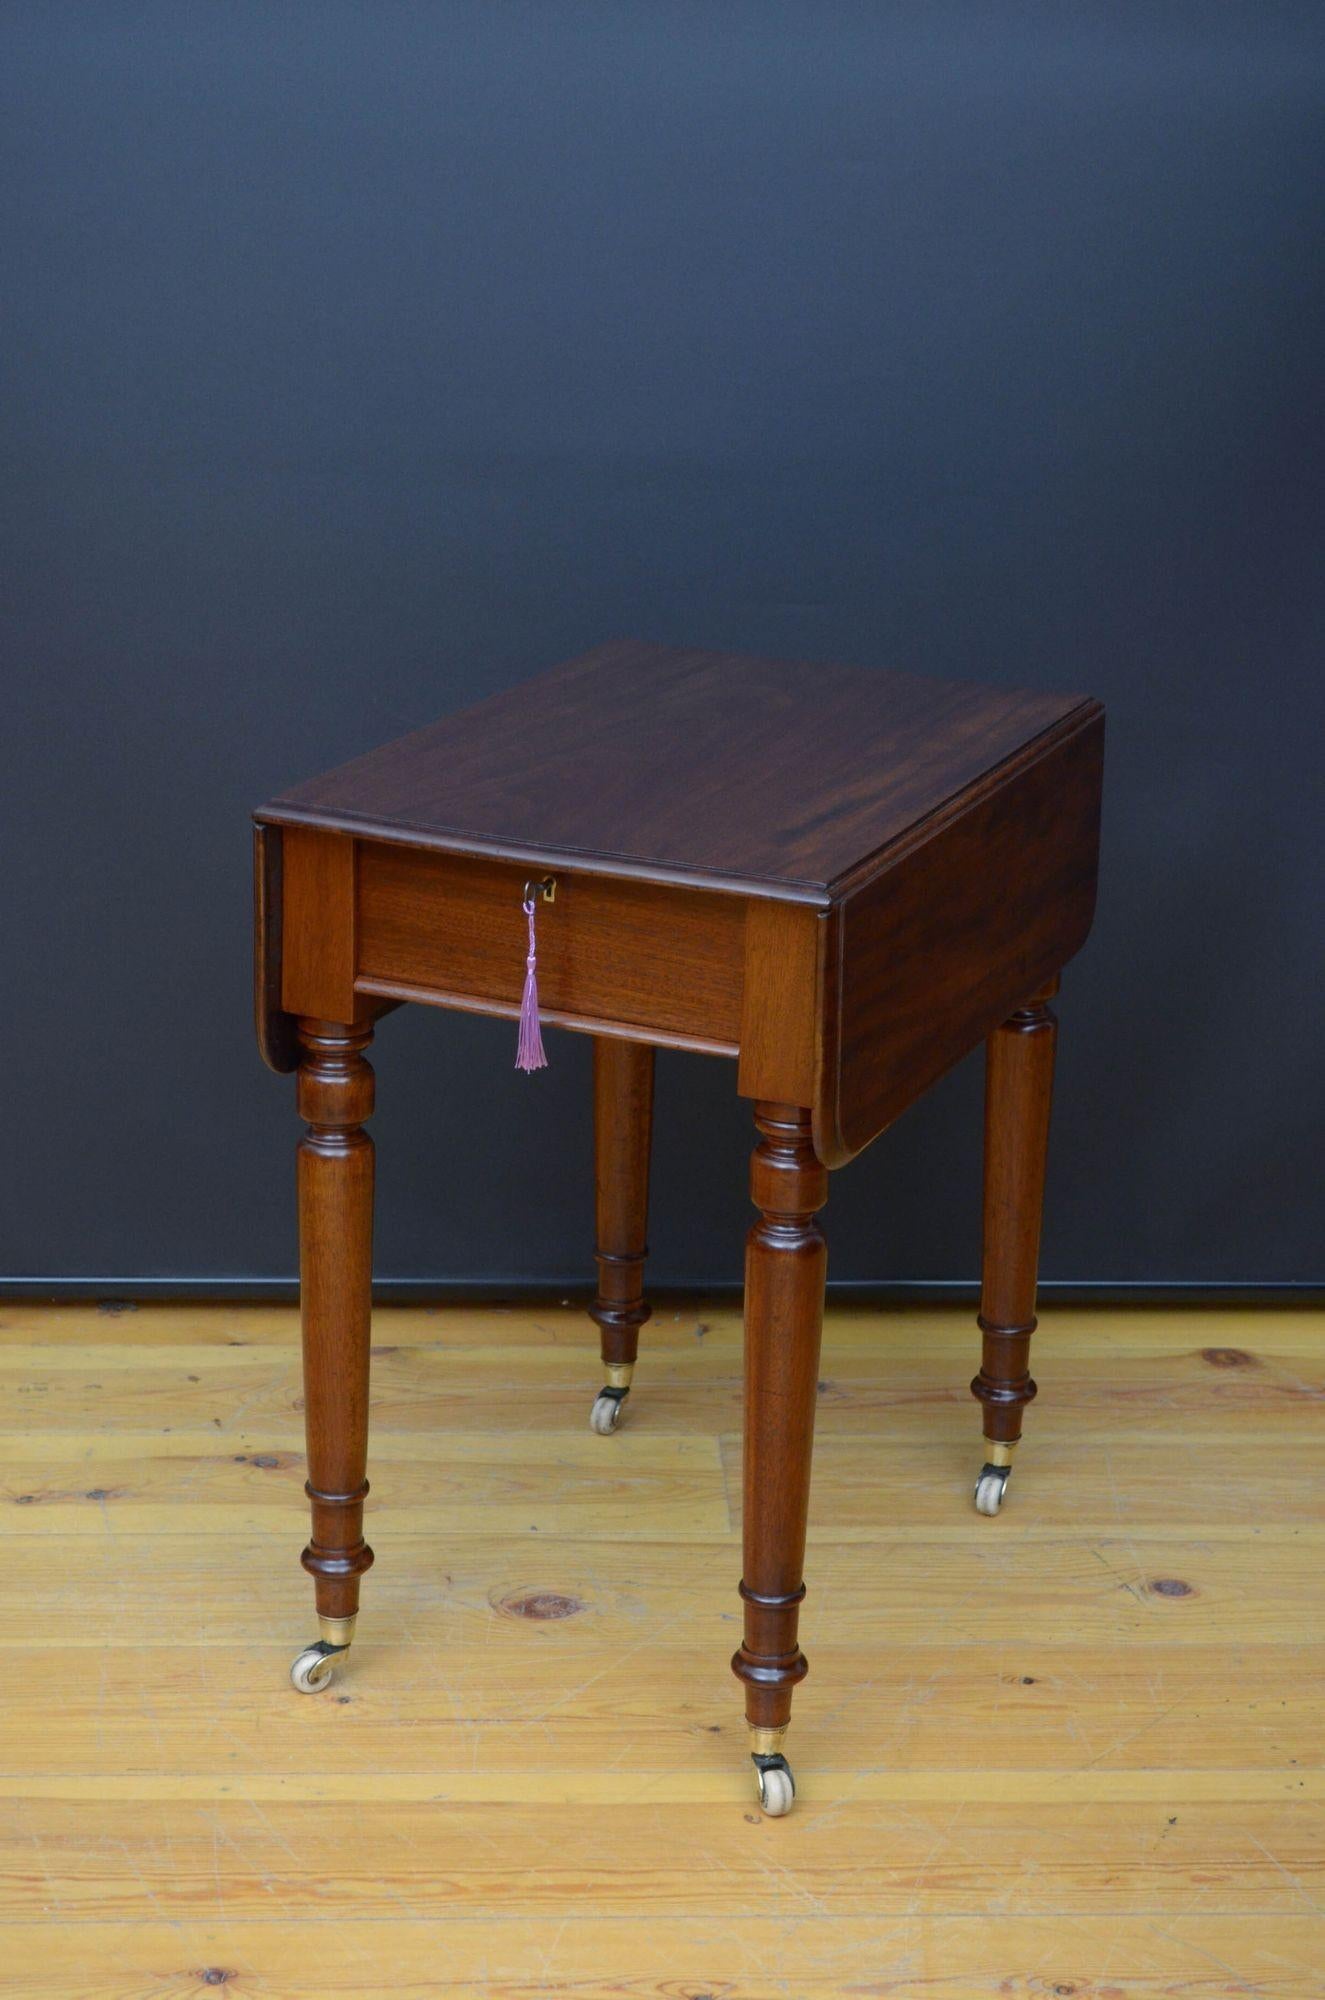 St044 Fine quality early Victorian drop leaf table by Heal & Son London, having figured mahogany top with moulded edge above a mahogany lined draw with original working lock and a key, stamped by the maker, all standing on turned legs terminating in